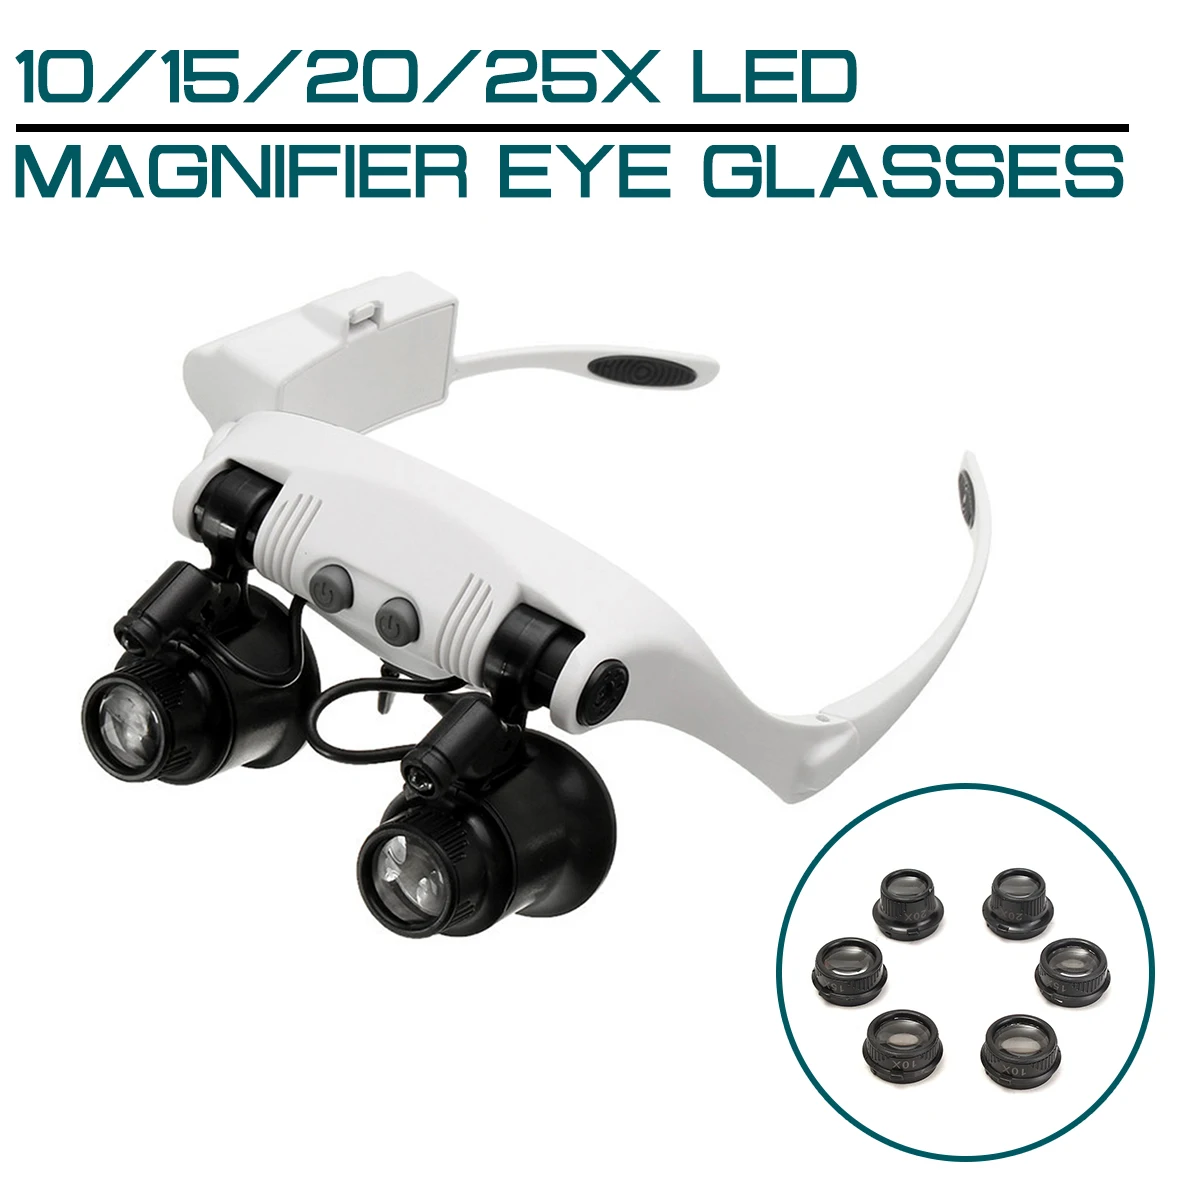 10X 15X 20X 25X LED Magnifier Double Eye Glasses with 8 Lens LED lamp Loupe Lens Jeweler Watch Repair Measurement